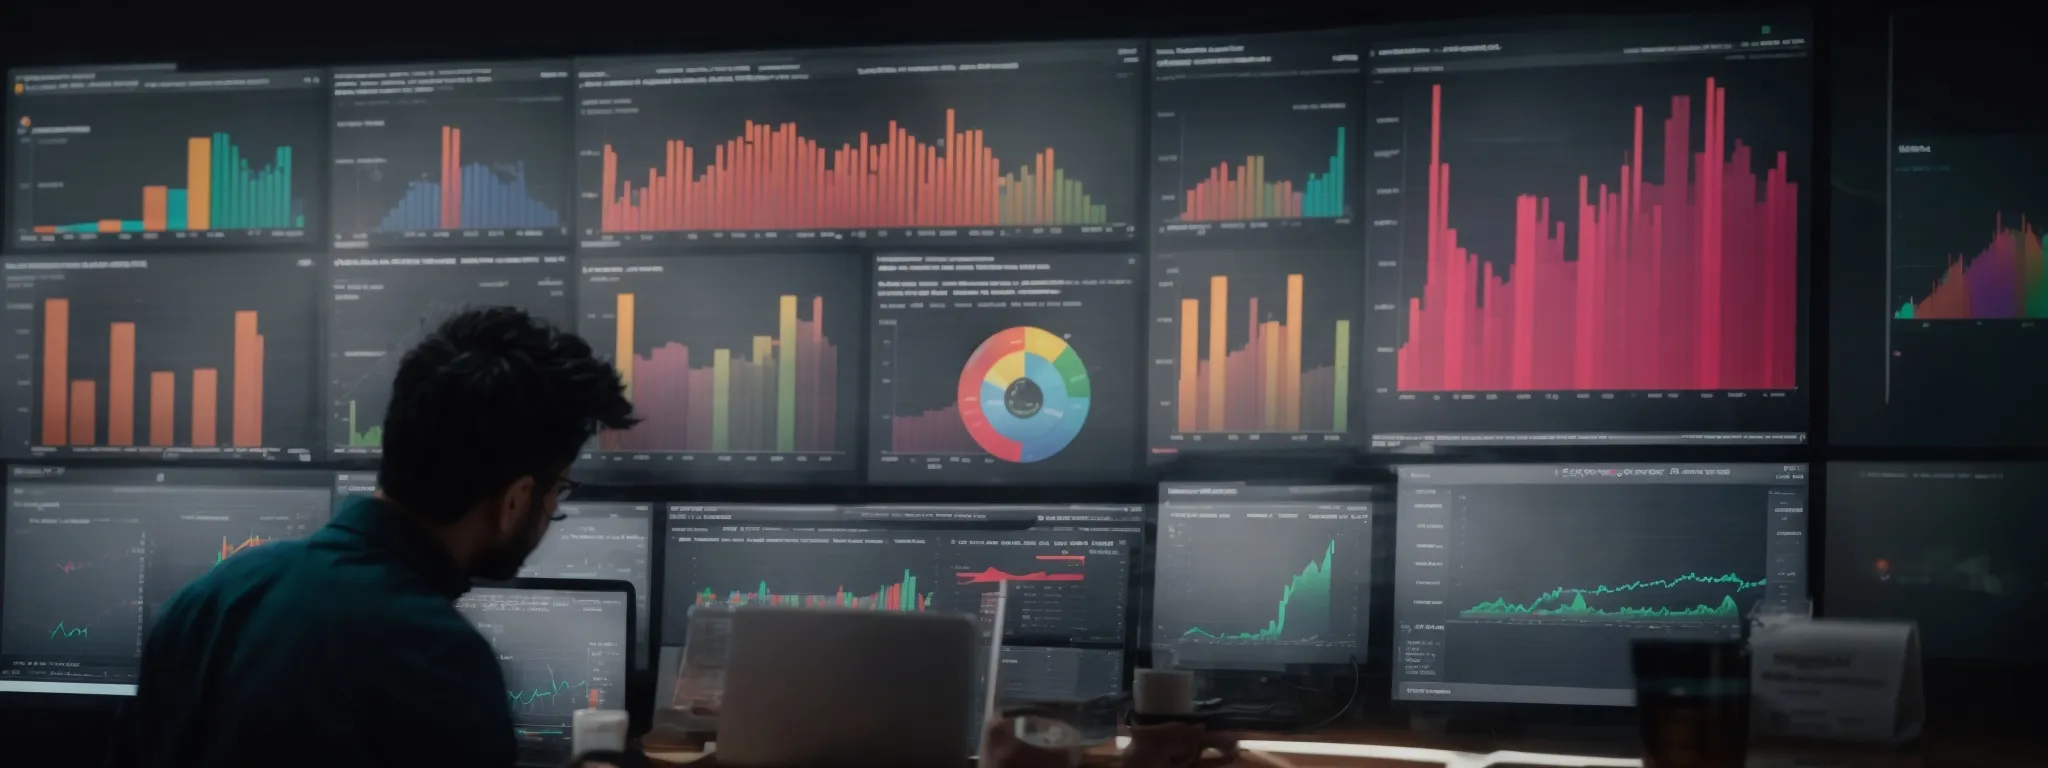 a marketer reviews colorful graphs and charts on a computer dashboard reflecting website analytics trends.